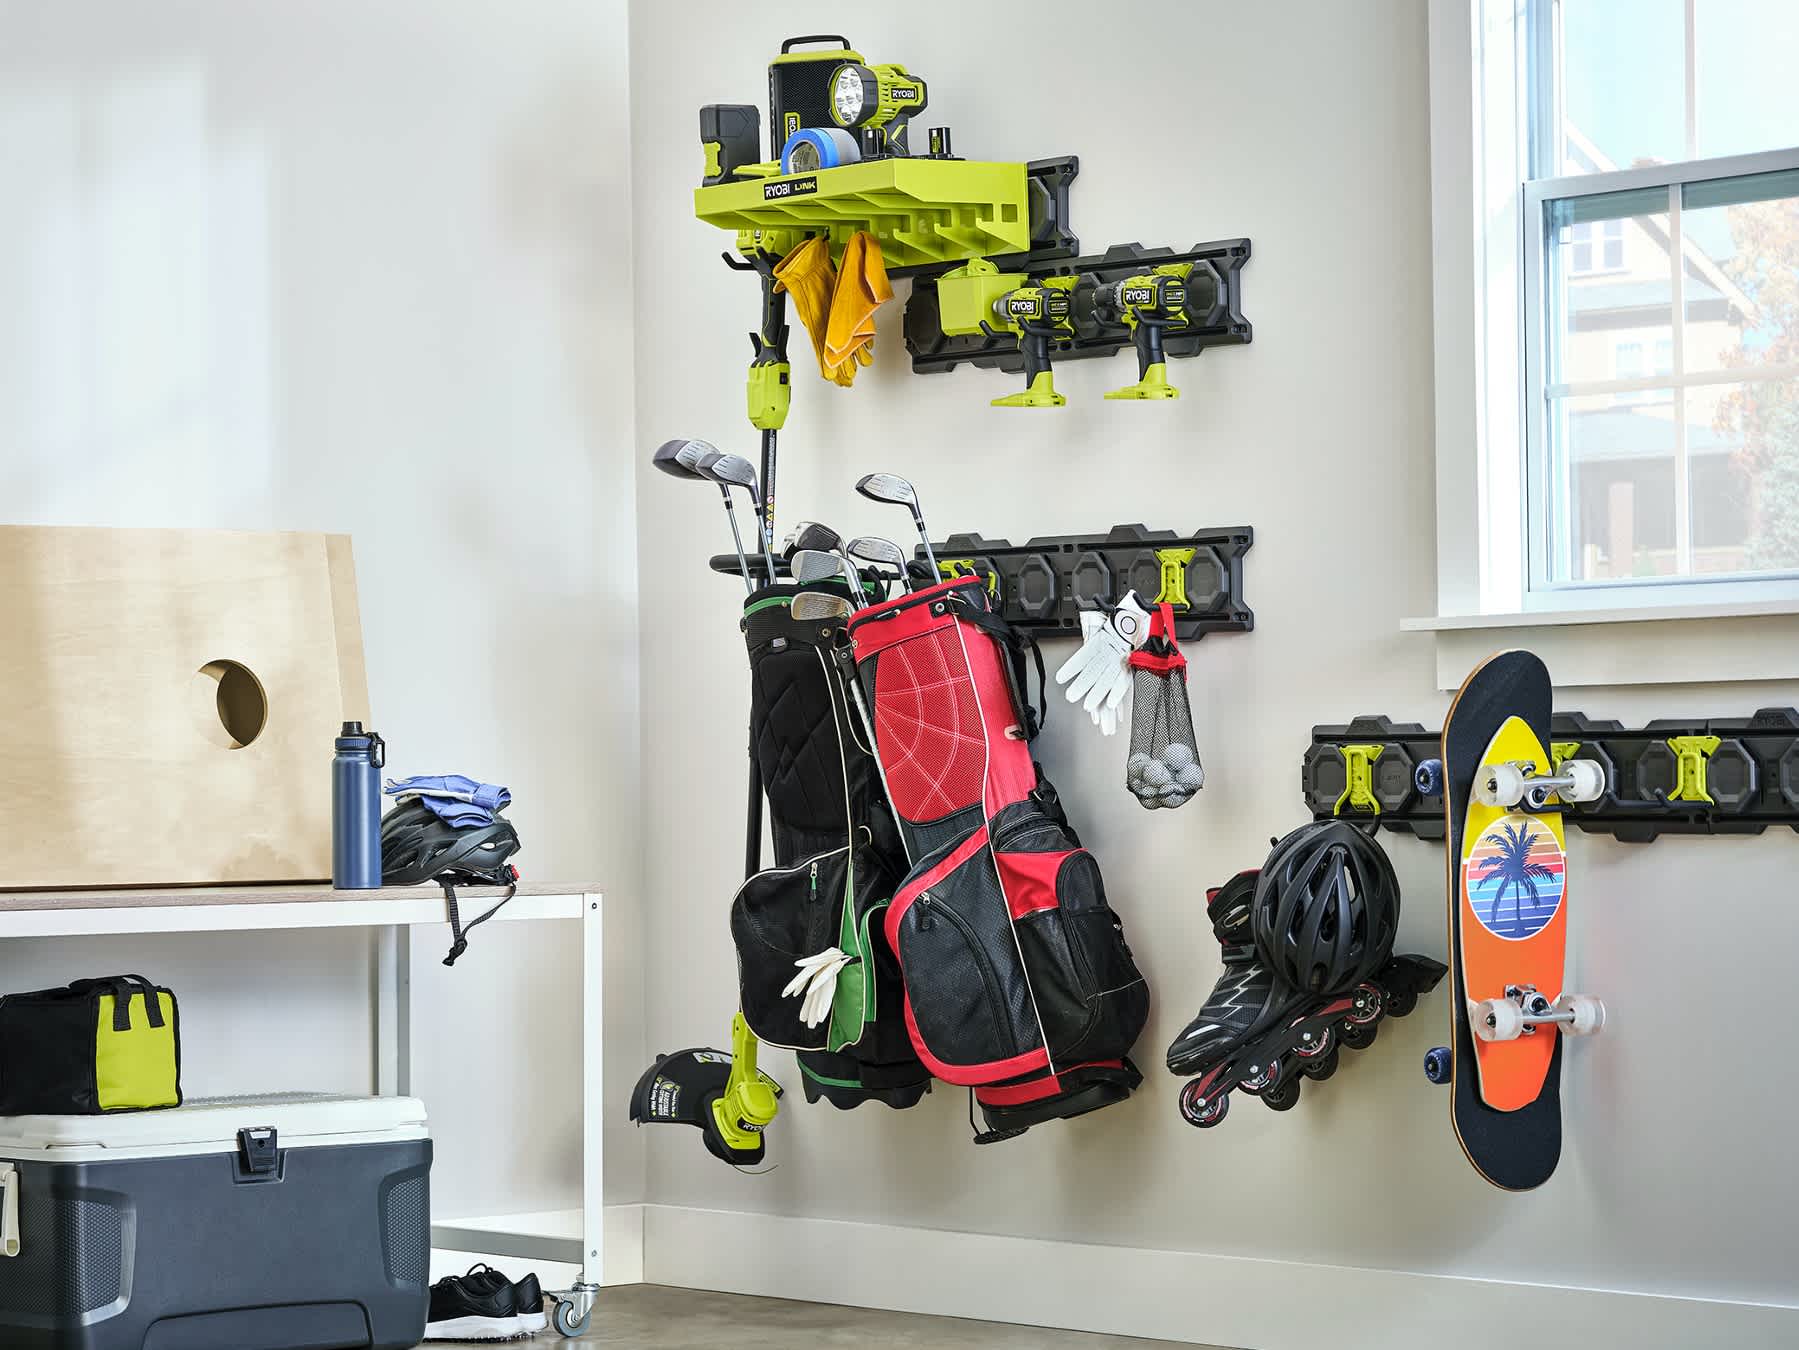 Product Features Image for LINK STORAGE TOOL ORGANIZER SHELF.